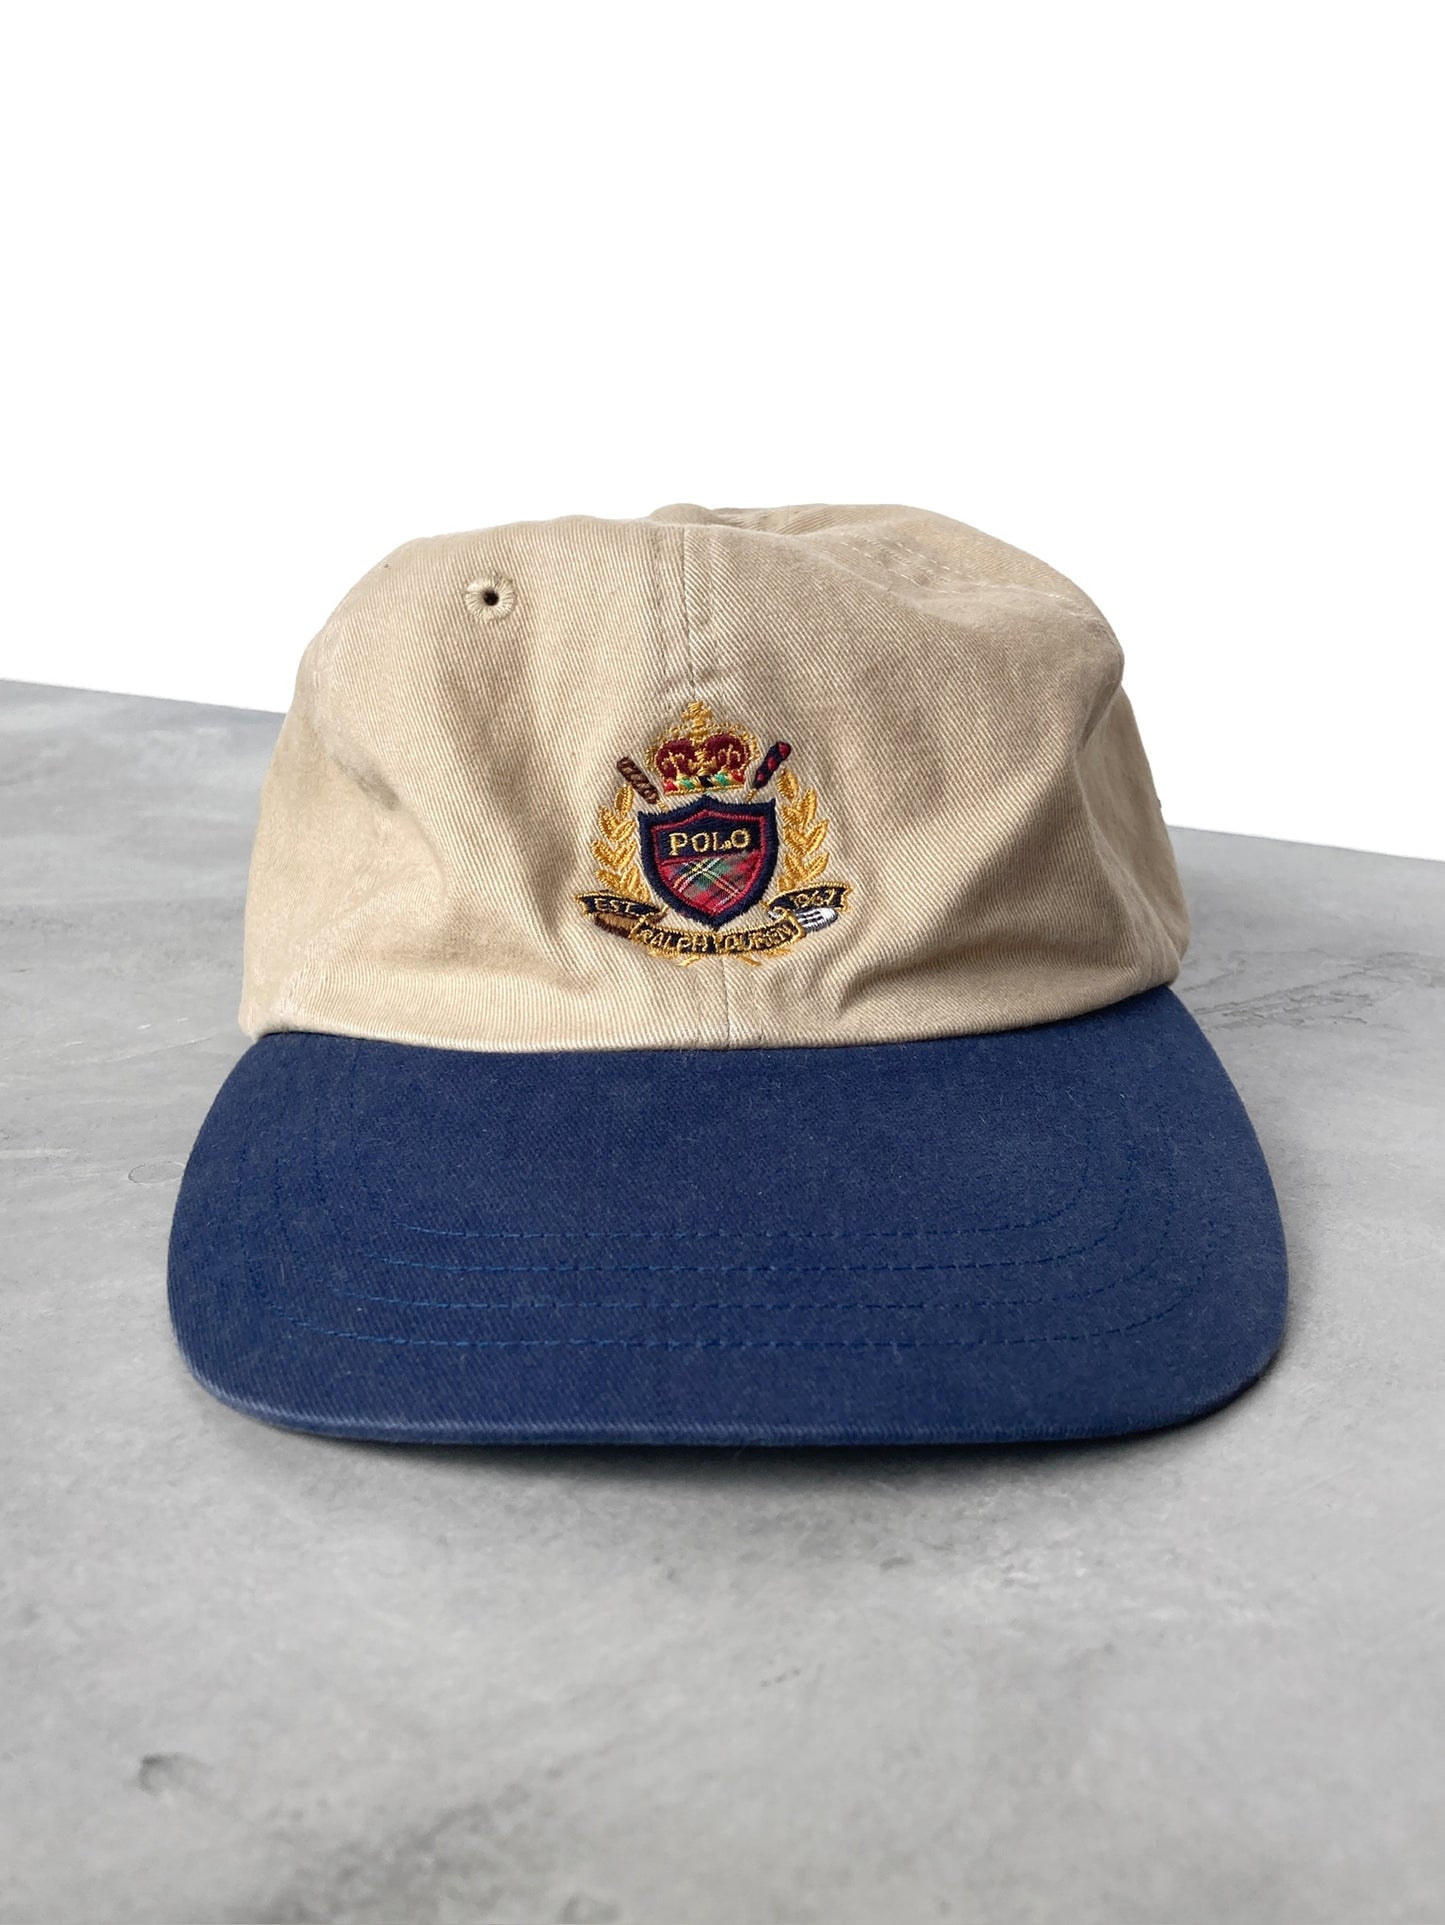 Polo Golf Hat 90's